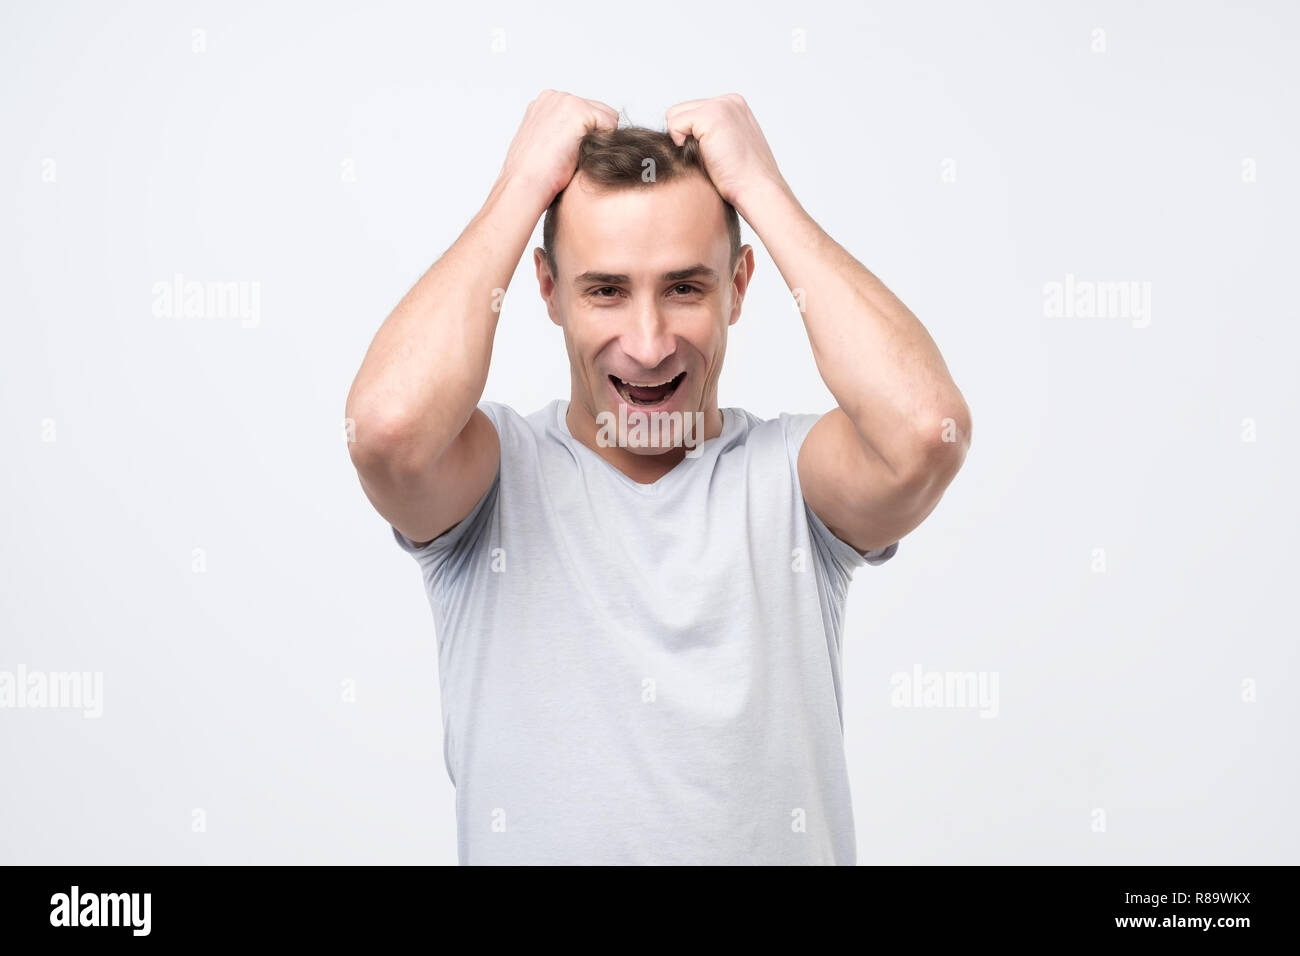 Young man who can not believe in his own happiness, being excited, holding hands on hair Stock Photo